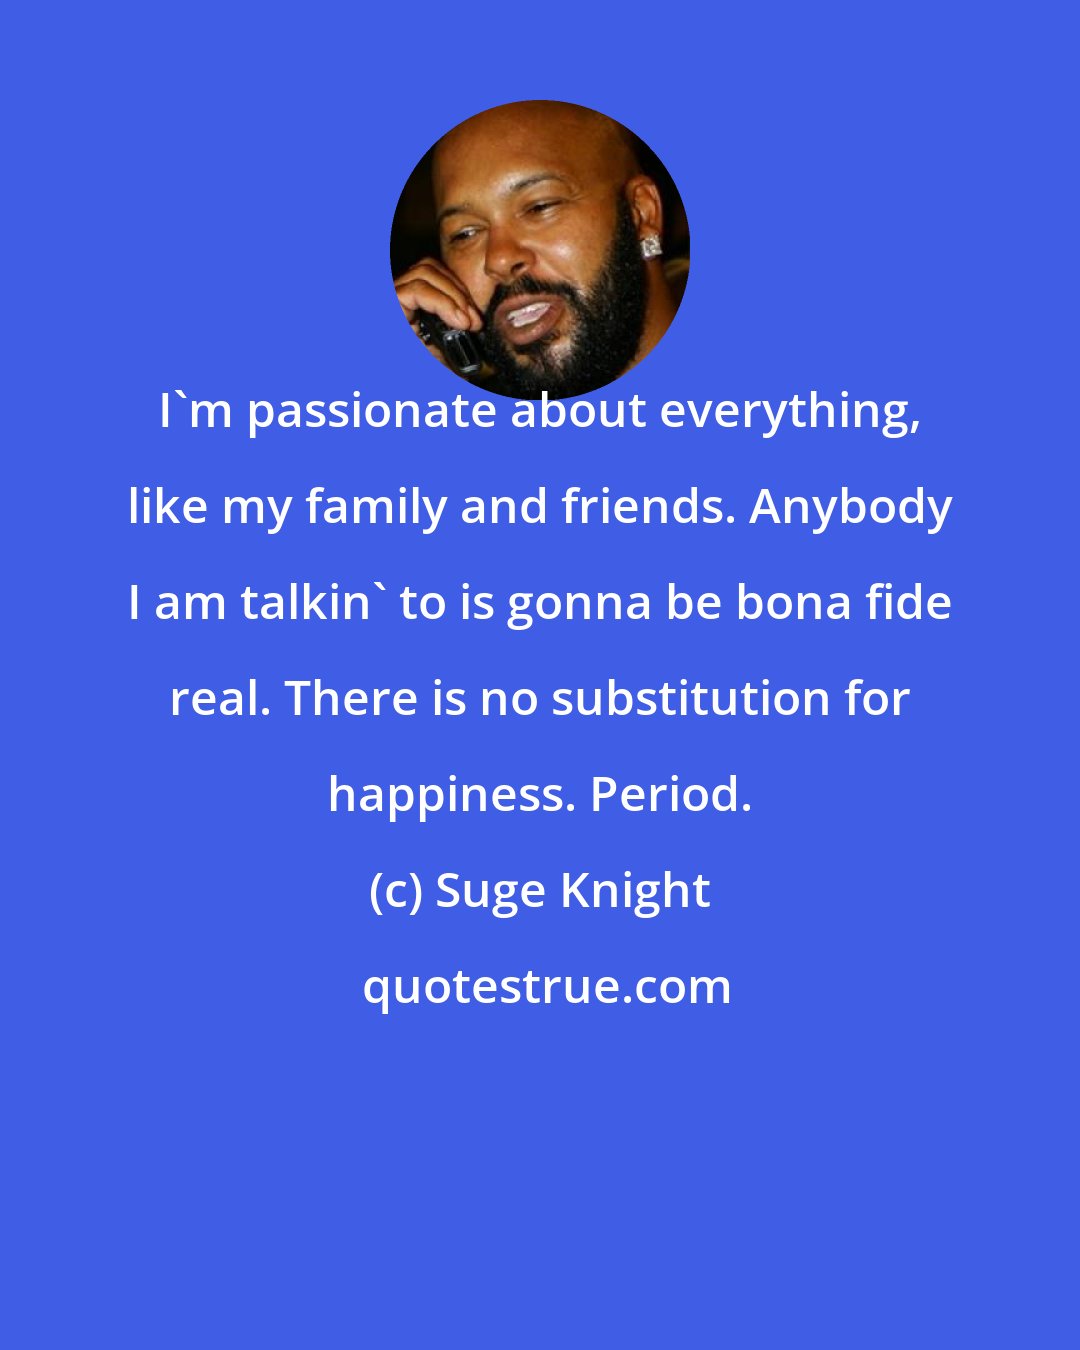 Suge Knight: I'm passionate about everything, like my family and friends. Anybody I am talkin' to is gonna be bona fide real. There is no substitution for happiness. Period.